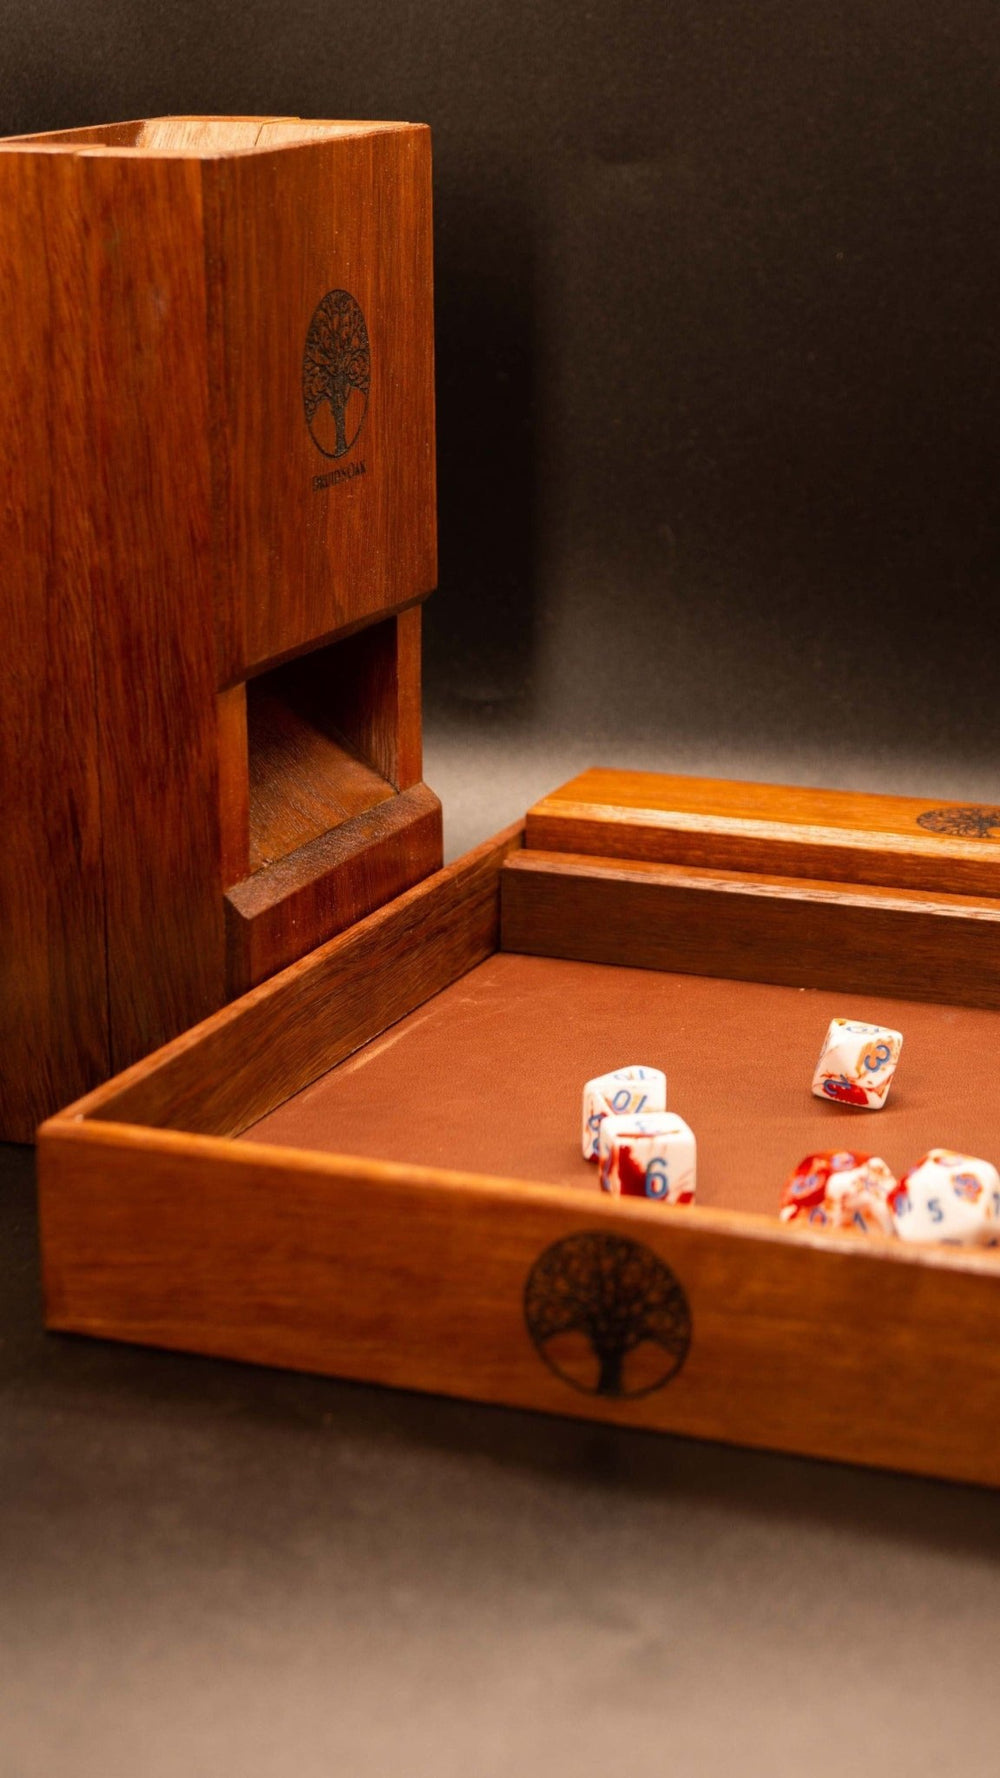 The jarrah tabletop gaming set includes matching tray with leather lining and rubber feet, dice vault and dice tower. The tower can be broken into two halves in stored neatly within the tray. The dice vault also fits neatly for easy storage. 